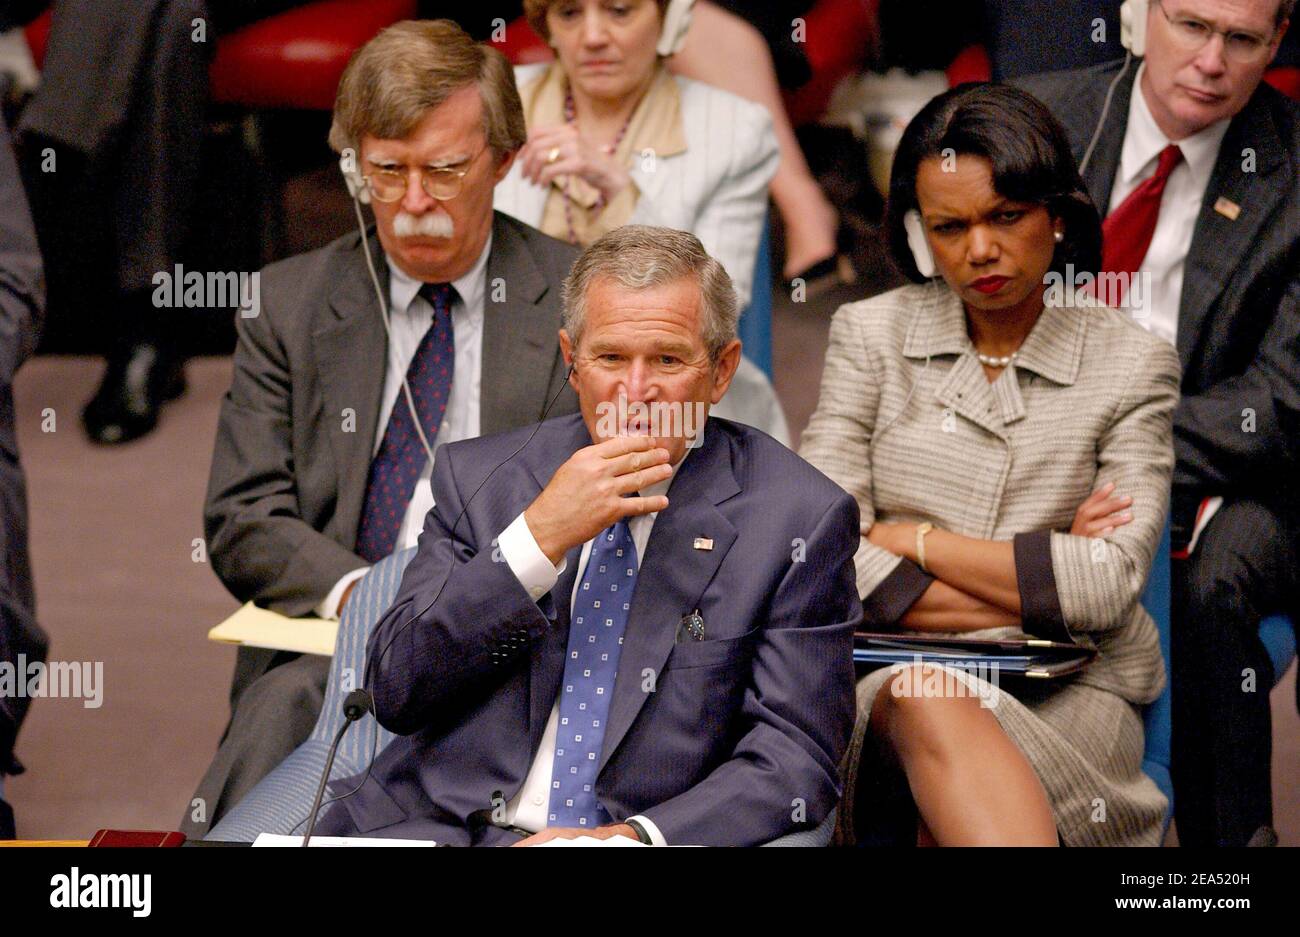 U.S. President George W. Bush, U.S. Secretary of State Condoleezza Rice and U.S. Ambassador to the U.N. John Bolton listen to the opening remarks during the United Nations' Security Council special meeting held during the United Nations' 60th anniversary and General Assembly opening ceremony in New York City, USA, on Wednesday September 14, 2005. Photo by Nicolas Khayat/ABACAPRESS.COM. Stock Photo